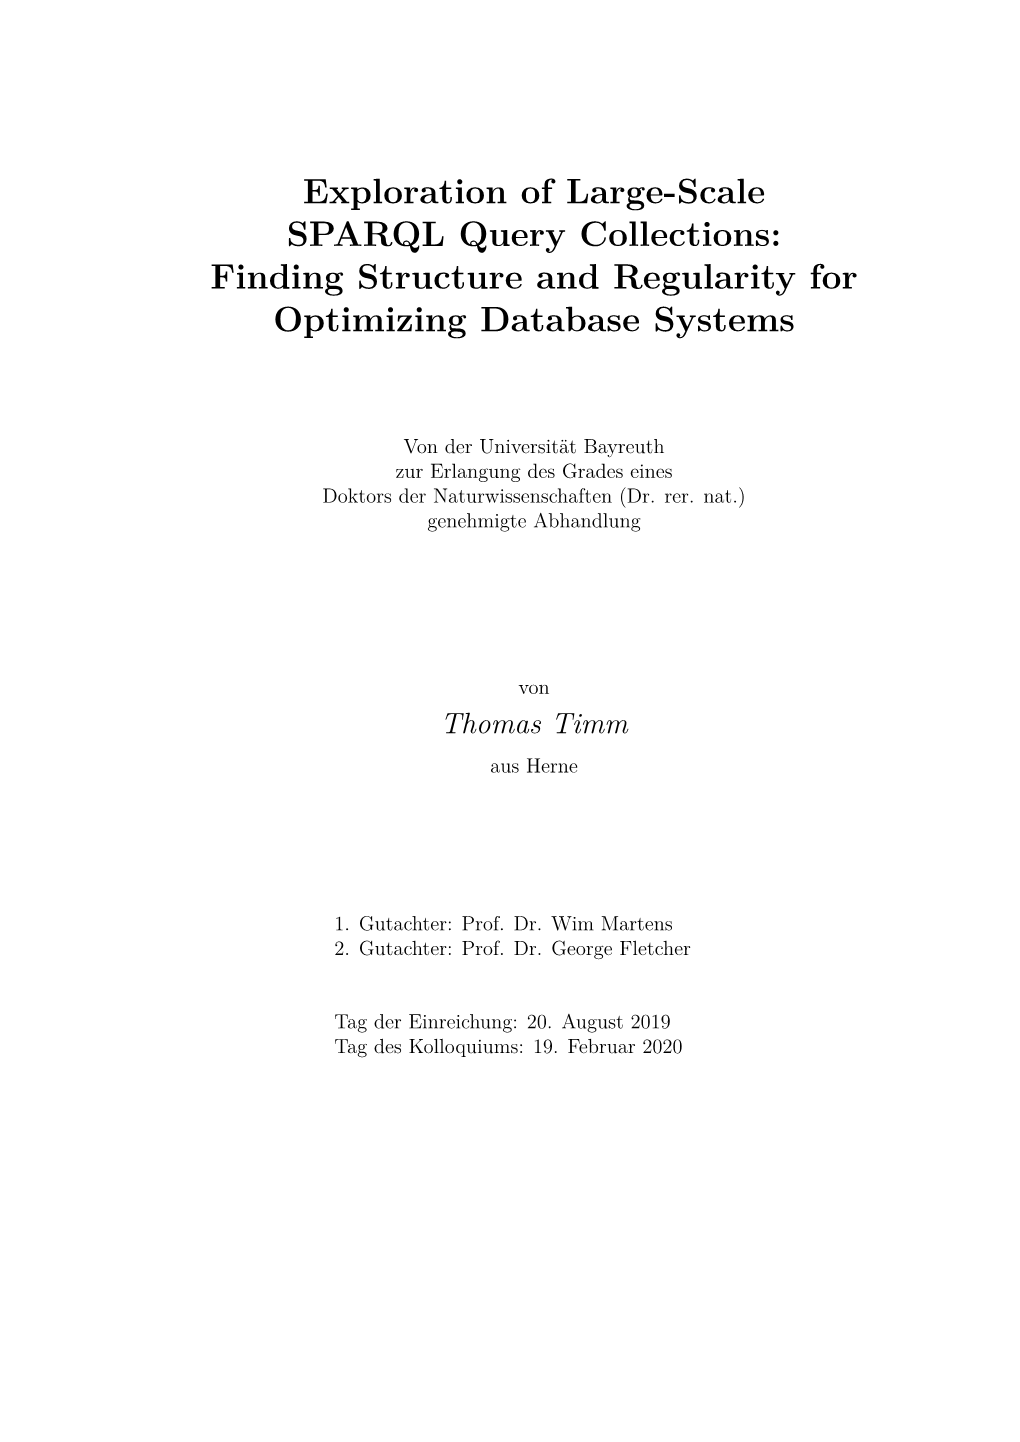 Exploration of Large-Scale SPARQL Query Collections: Finding Structure and Regularity for Optimizing Database Systems